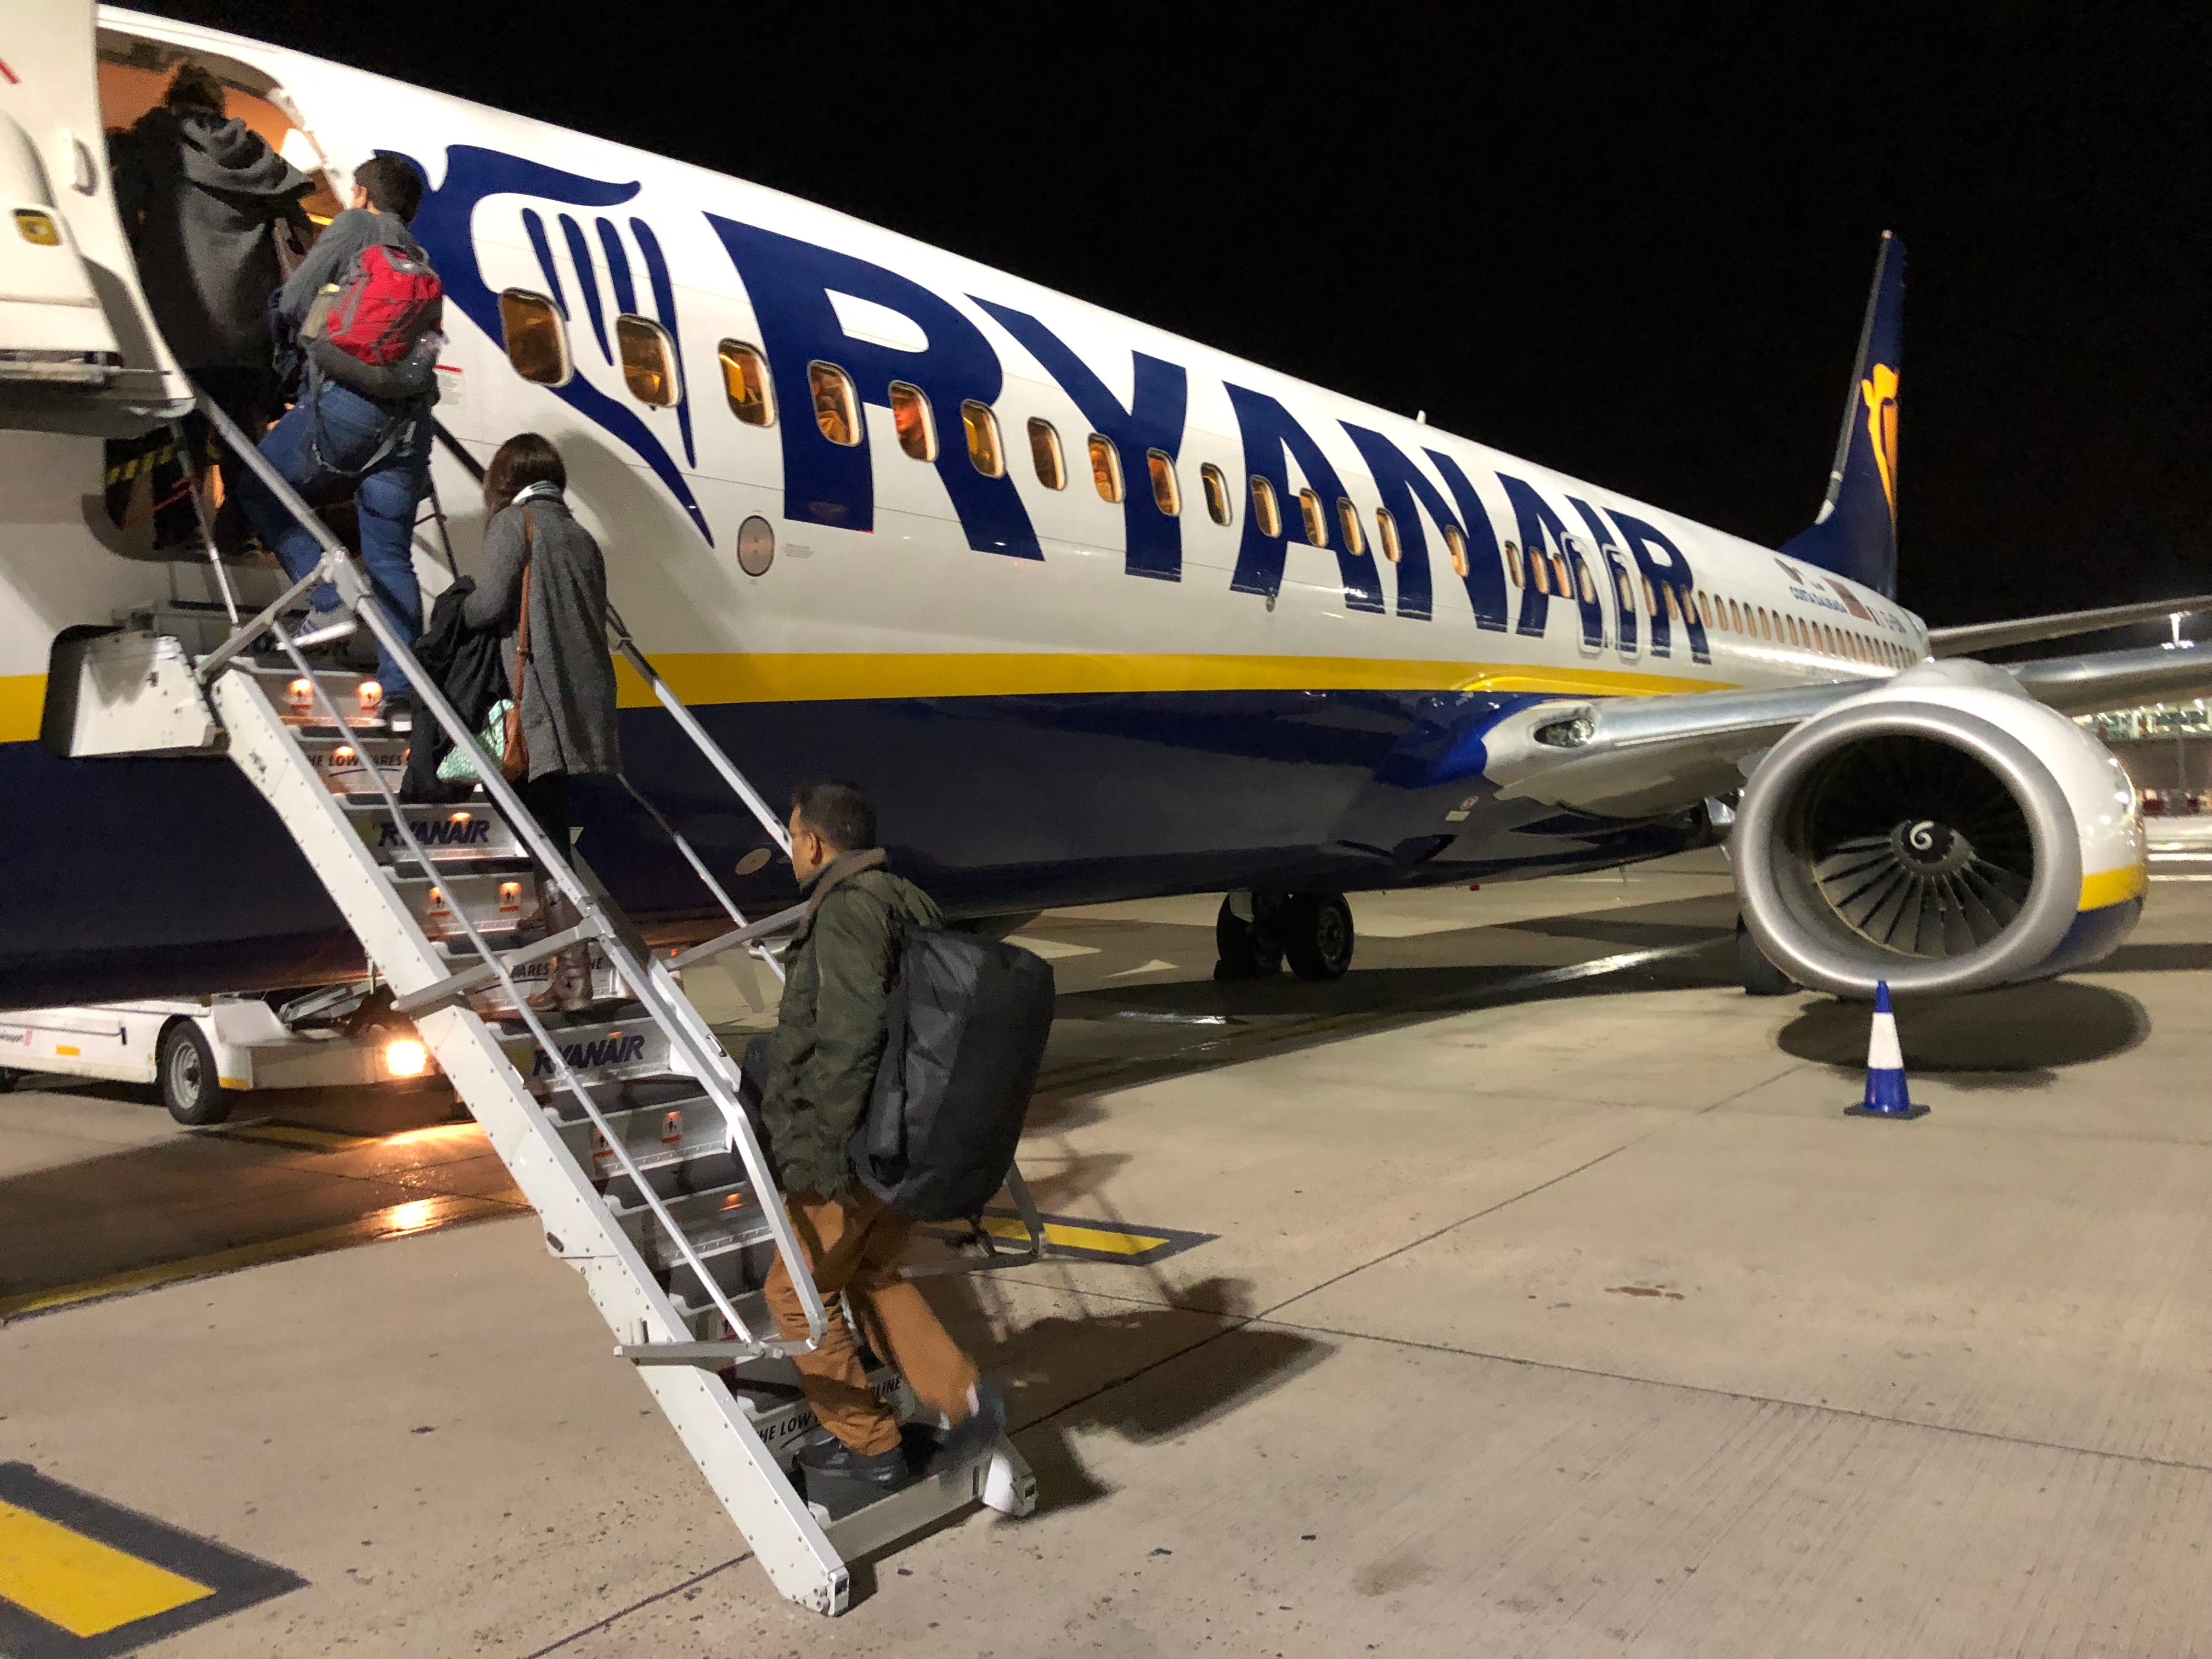 Ground stop: Ryanair is cancelling many flights in January, February and March